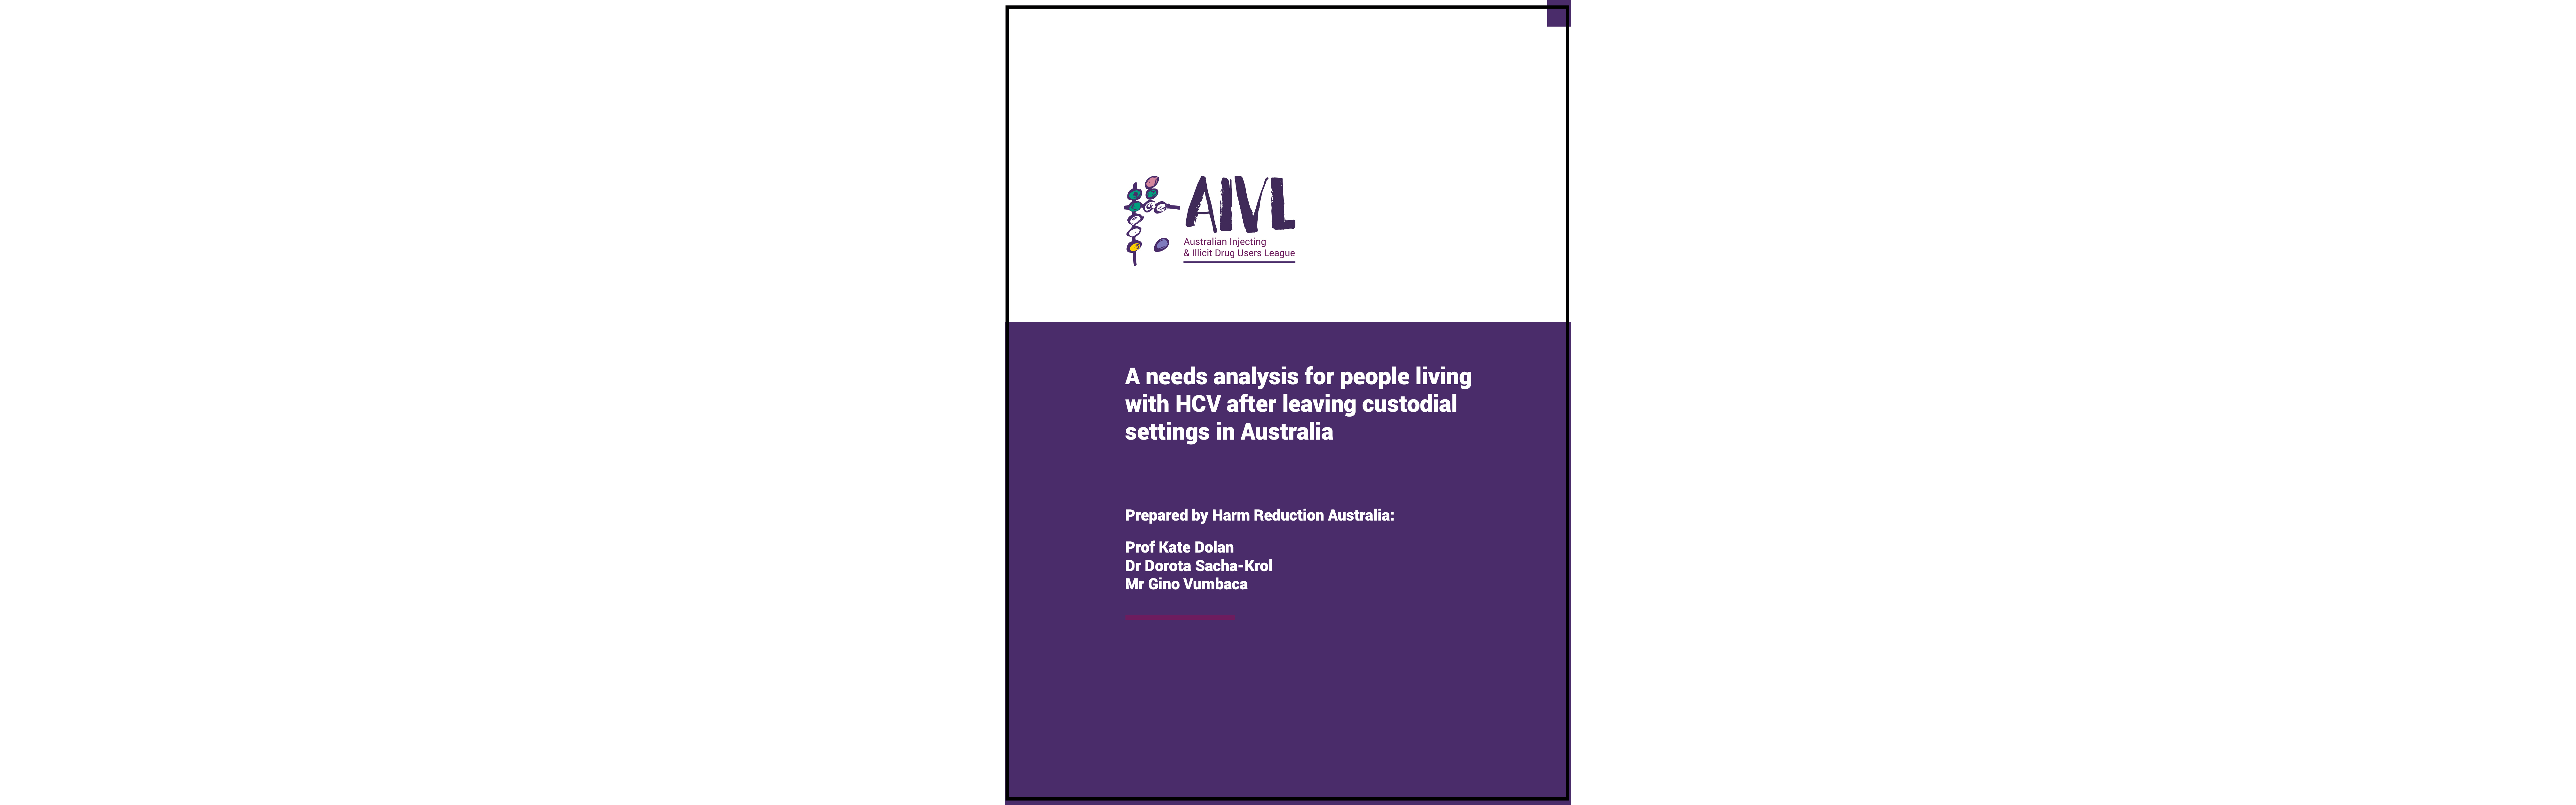 Featured image for “A needs analysis for people living with HCV after leaving custodial settings in Australia”